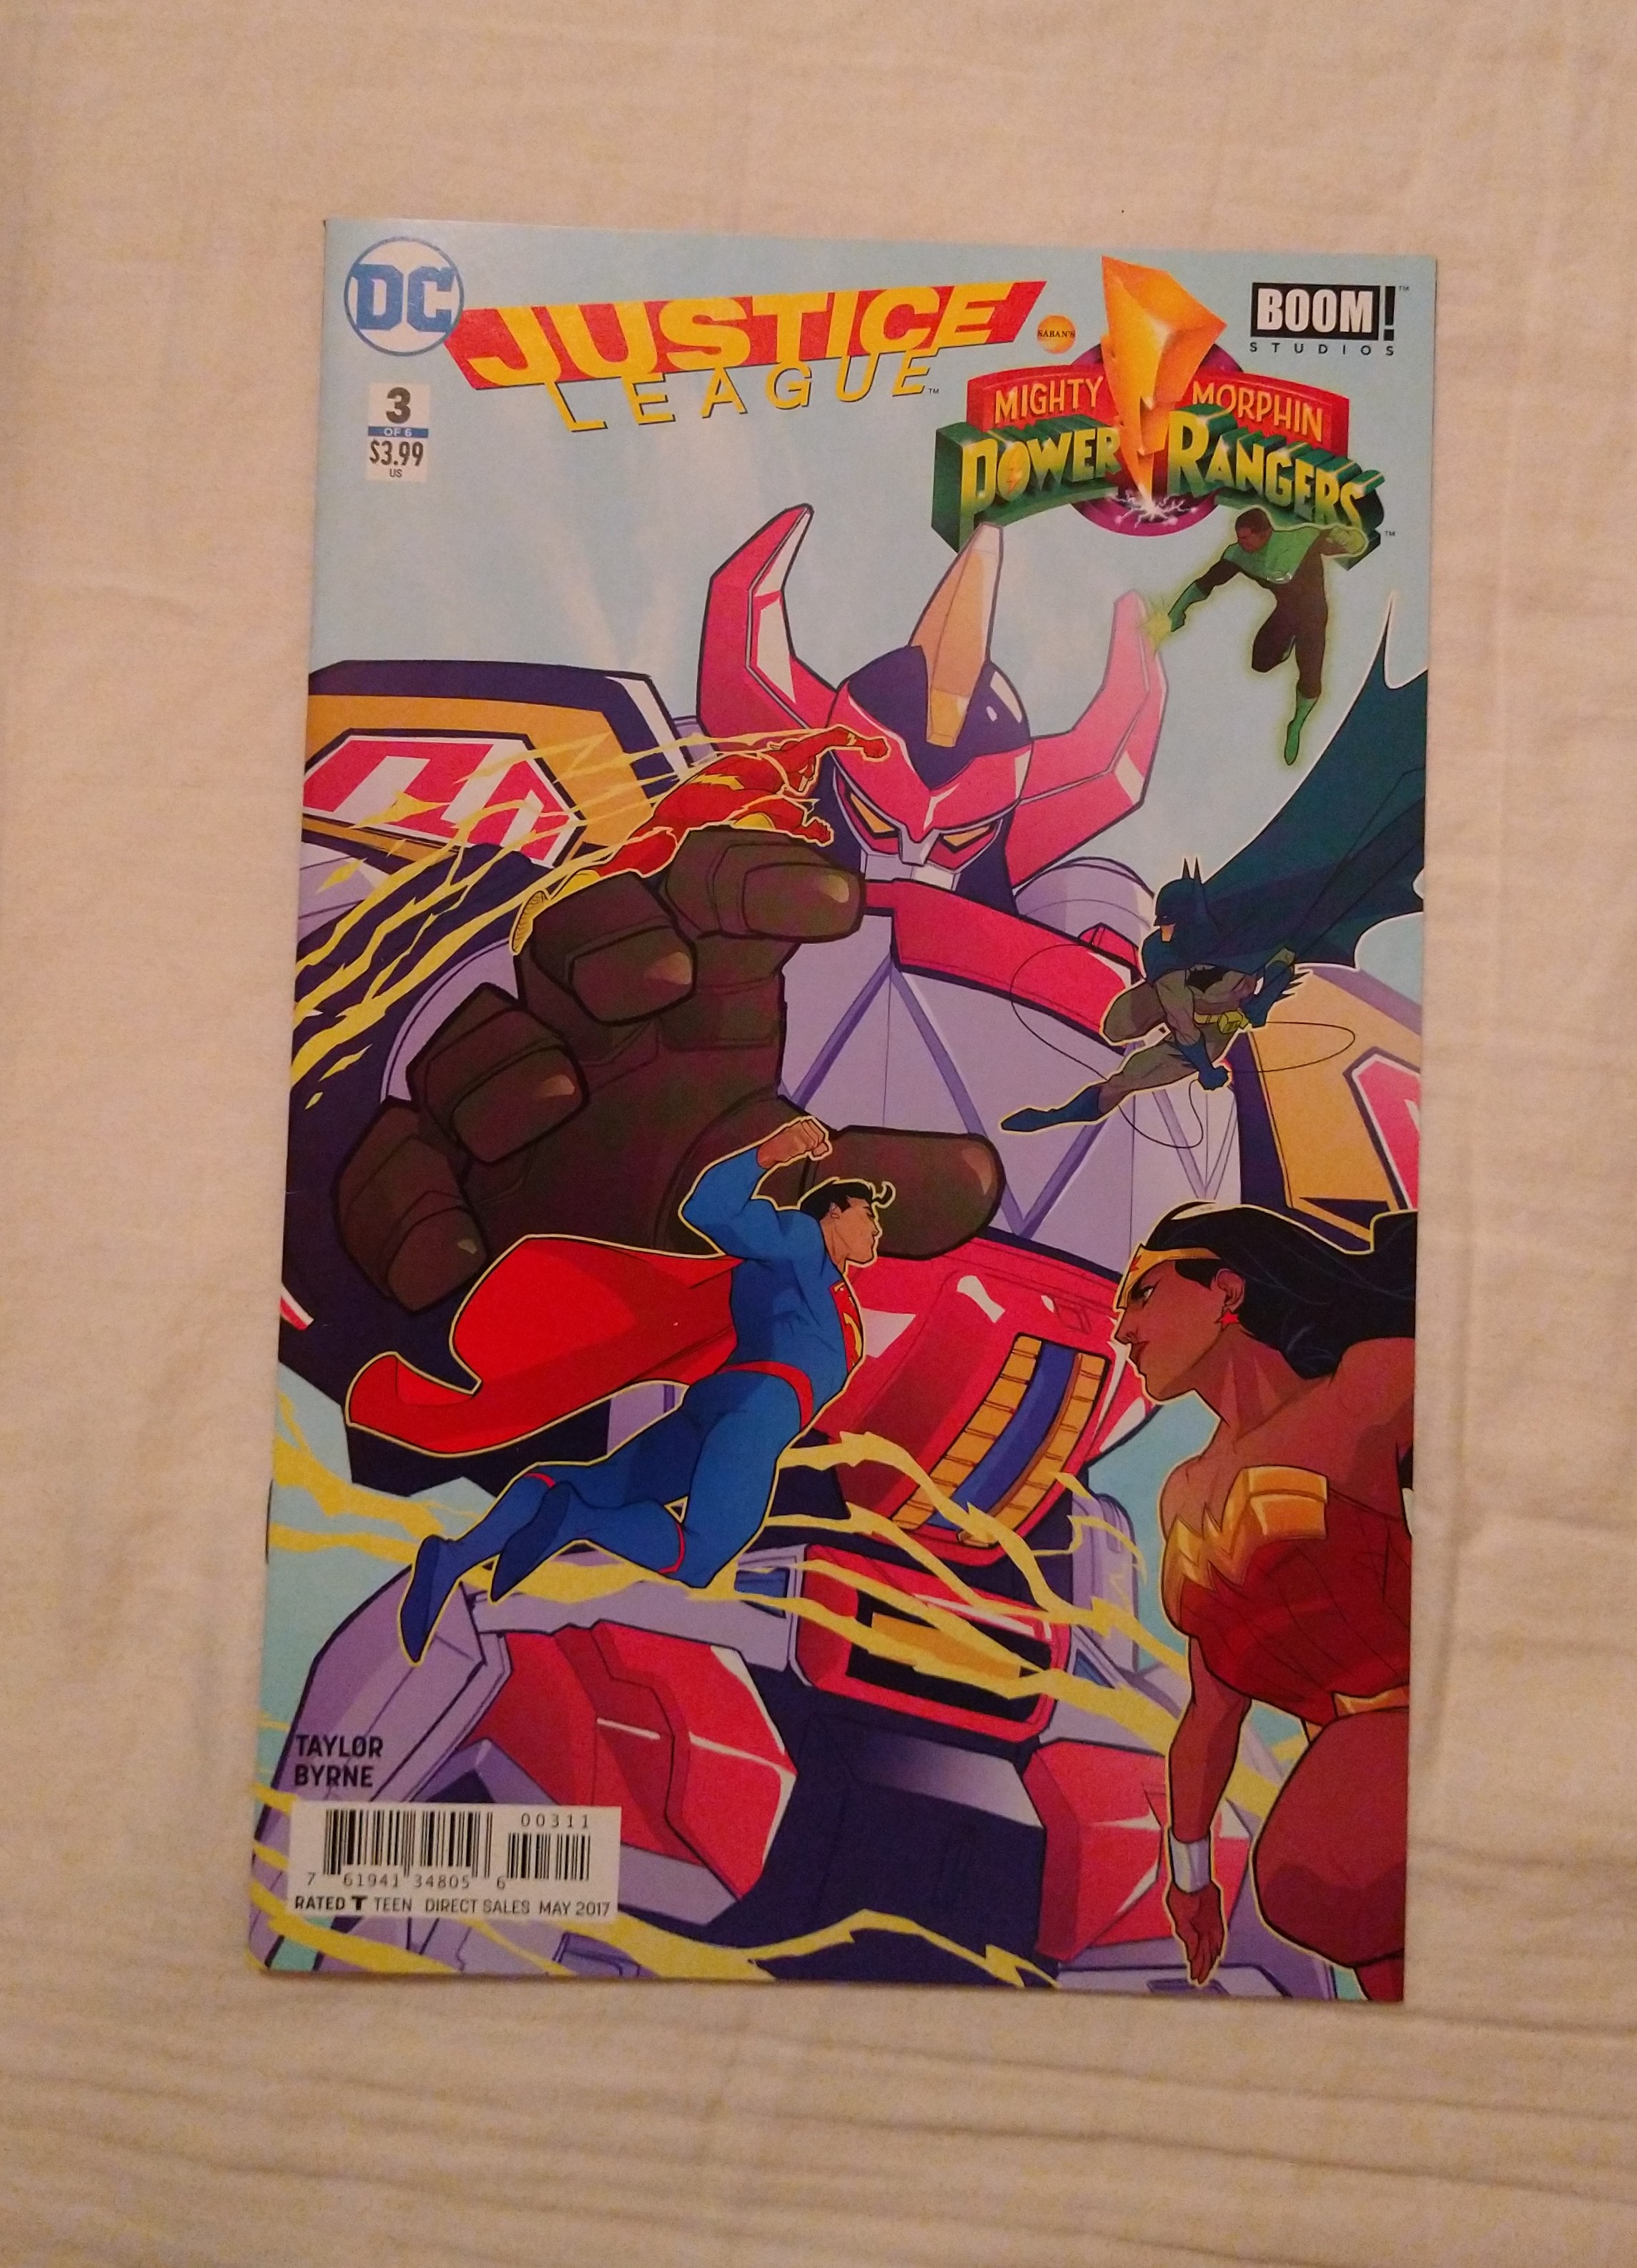 image of a comic book